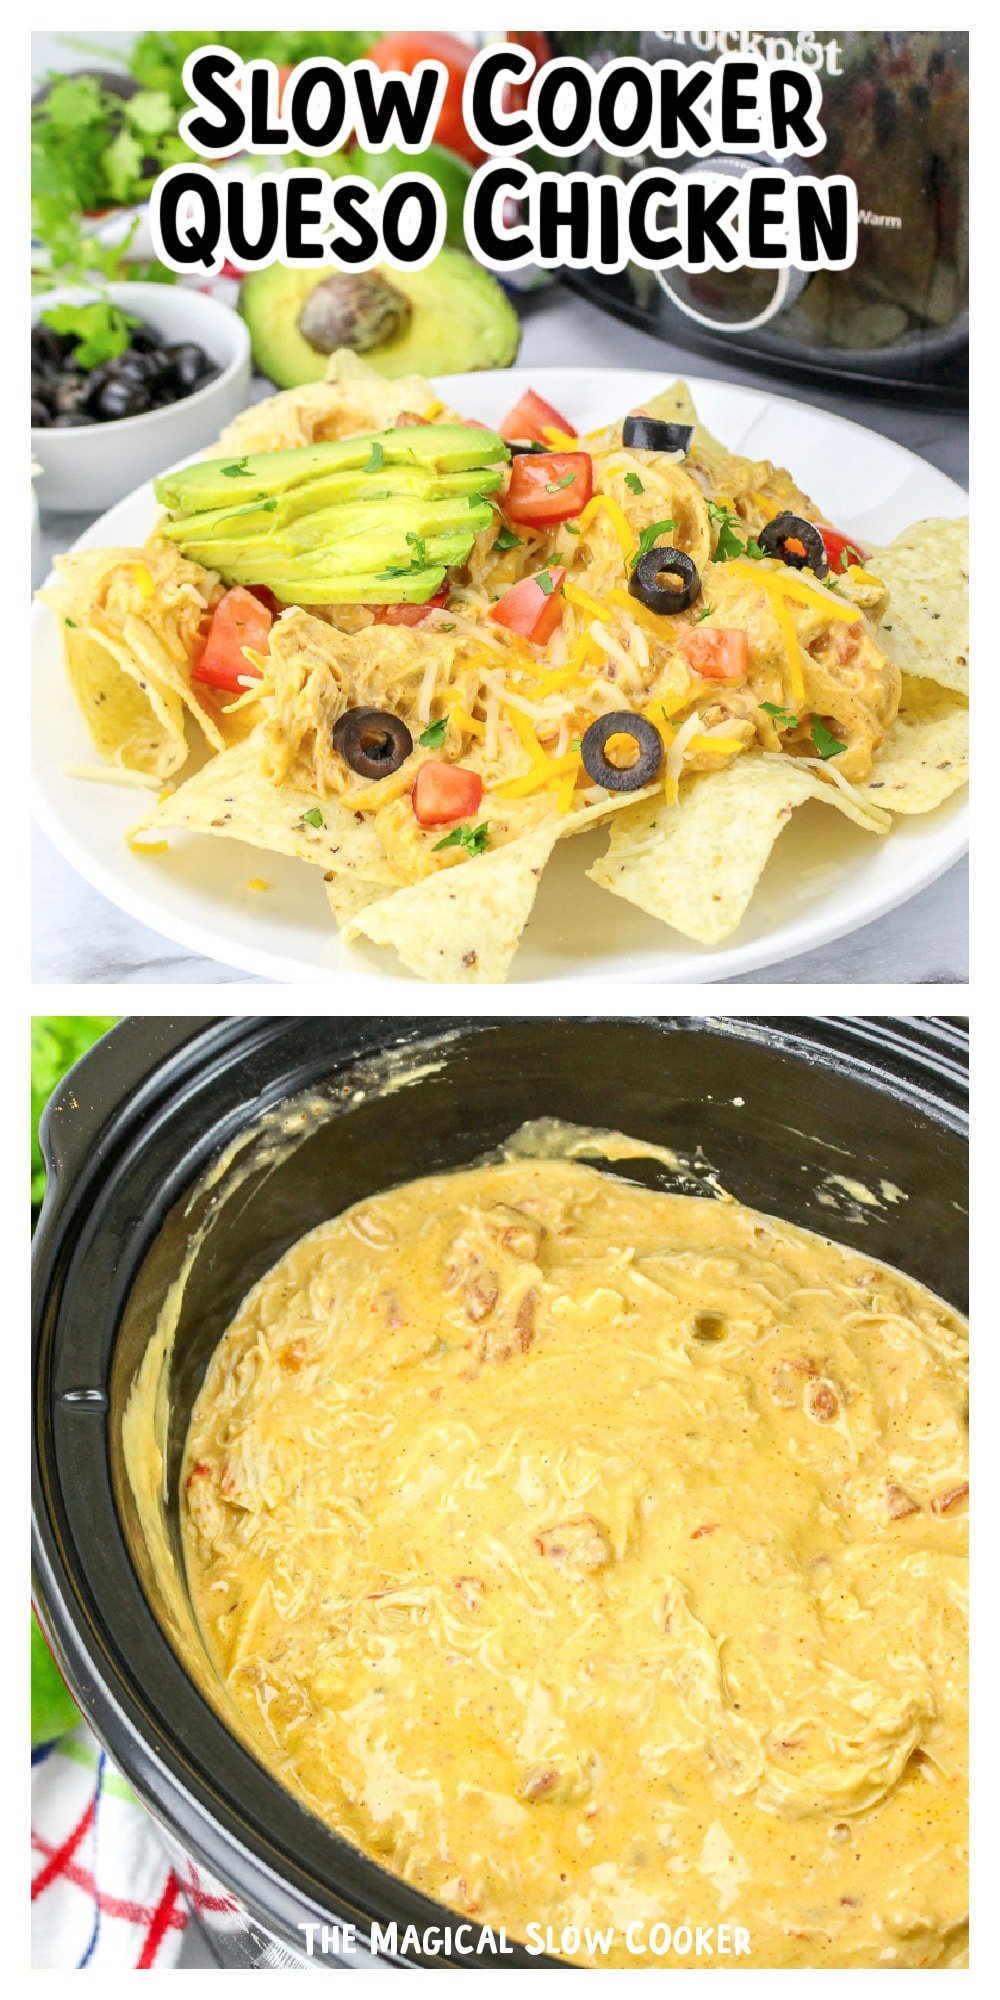 Slow Cooker Queso Chicken - The Magical Slow Cooker